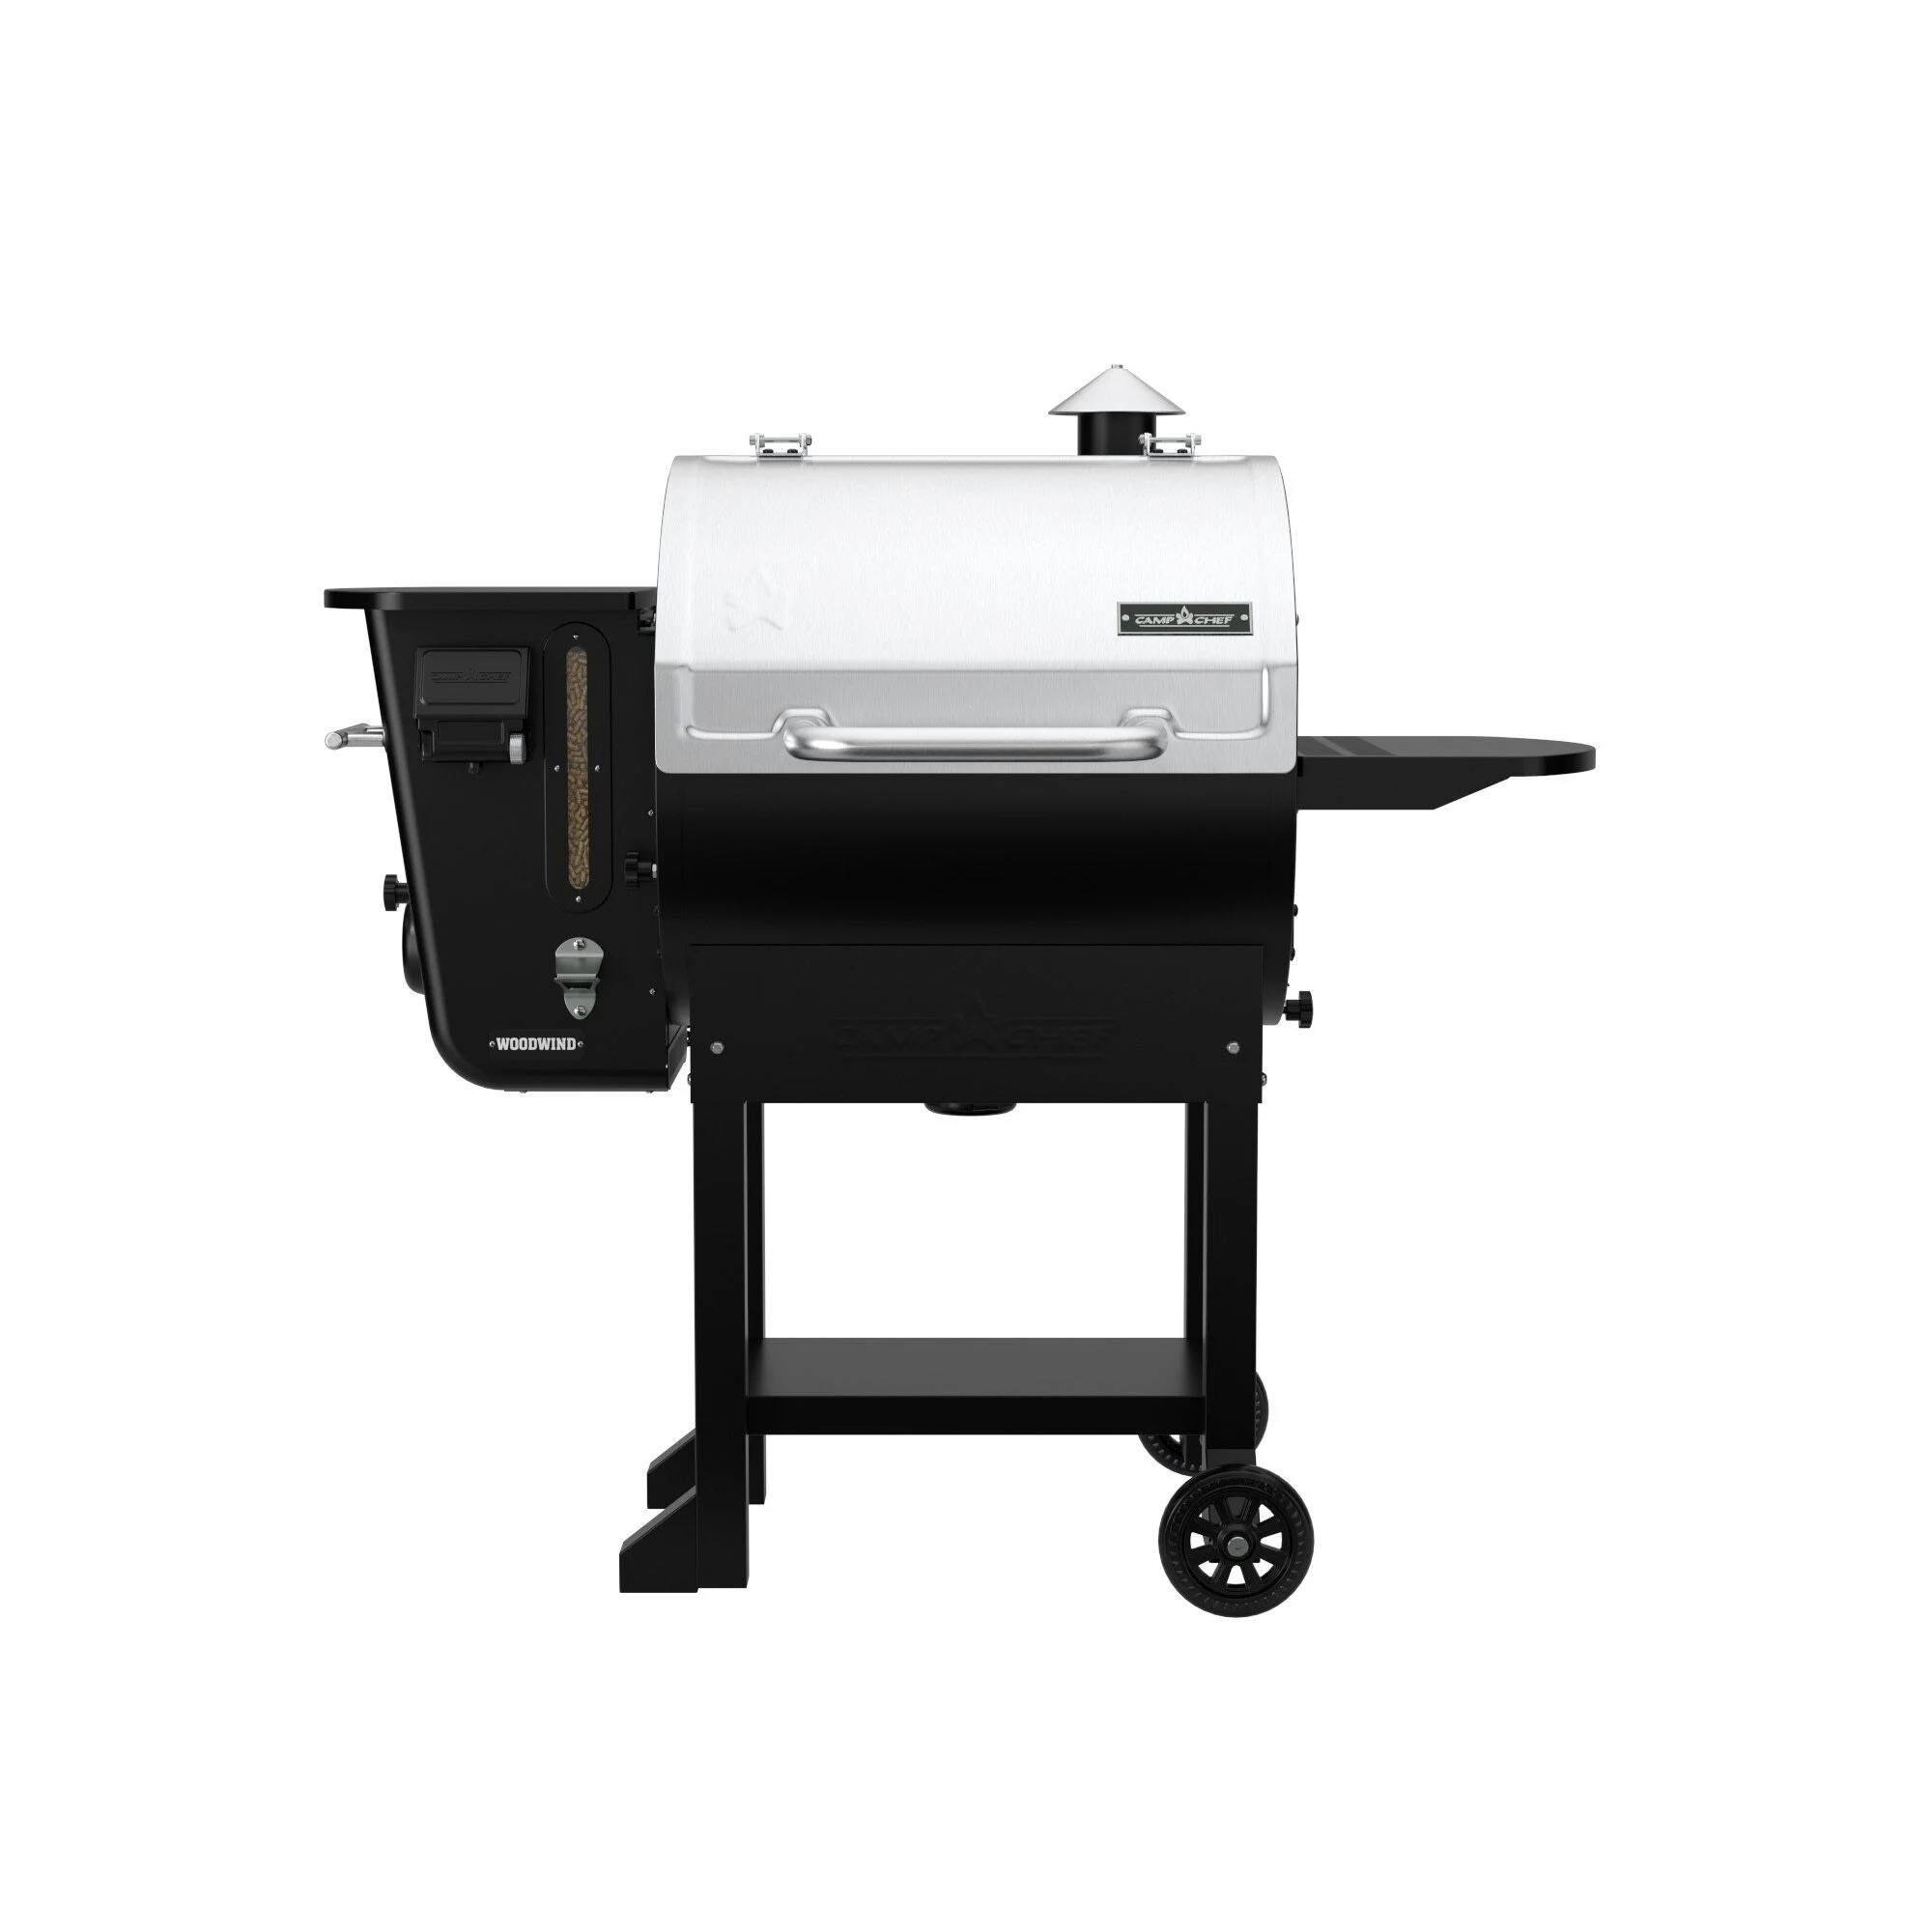 Camp Chef Woodwind WiFi Pellet Grill · 24 in.